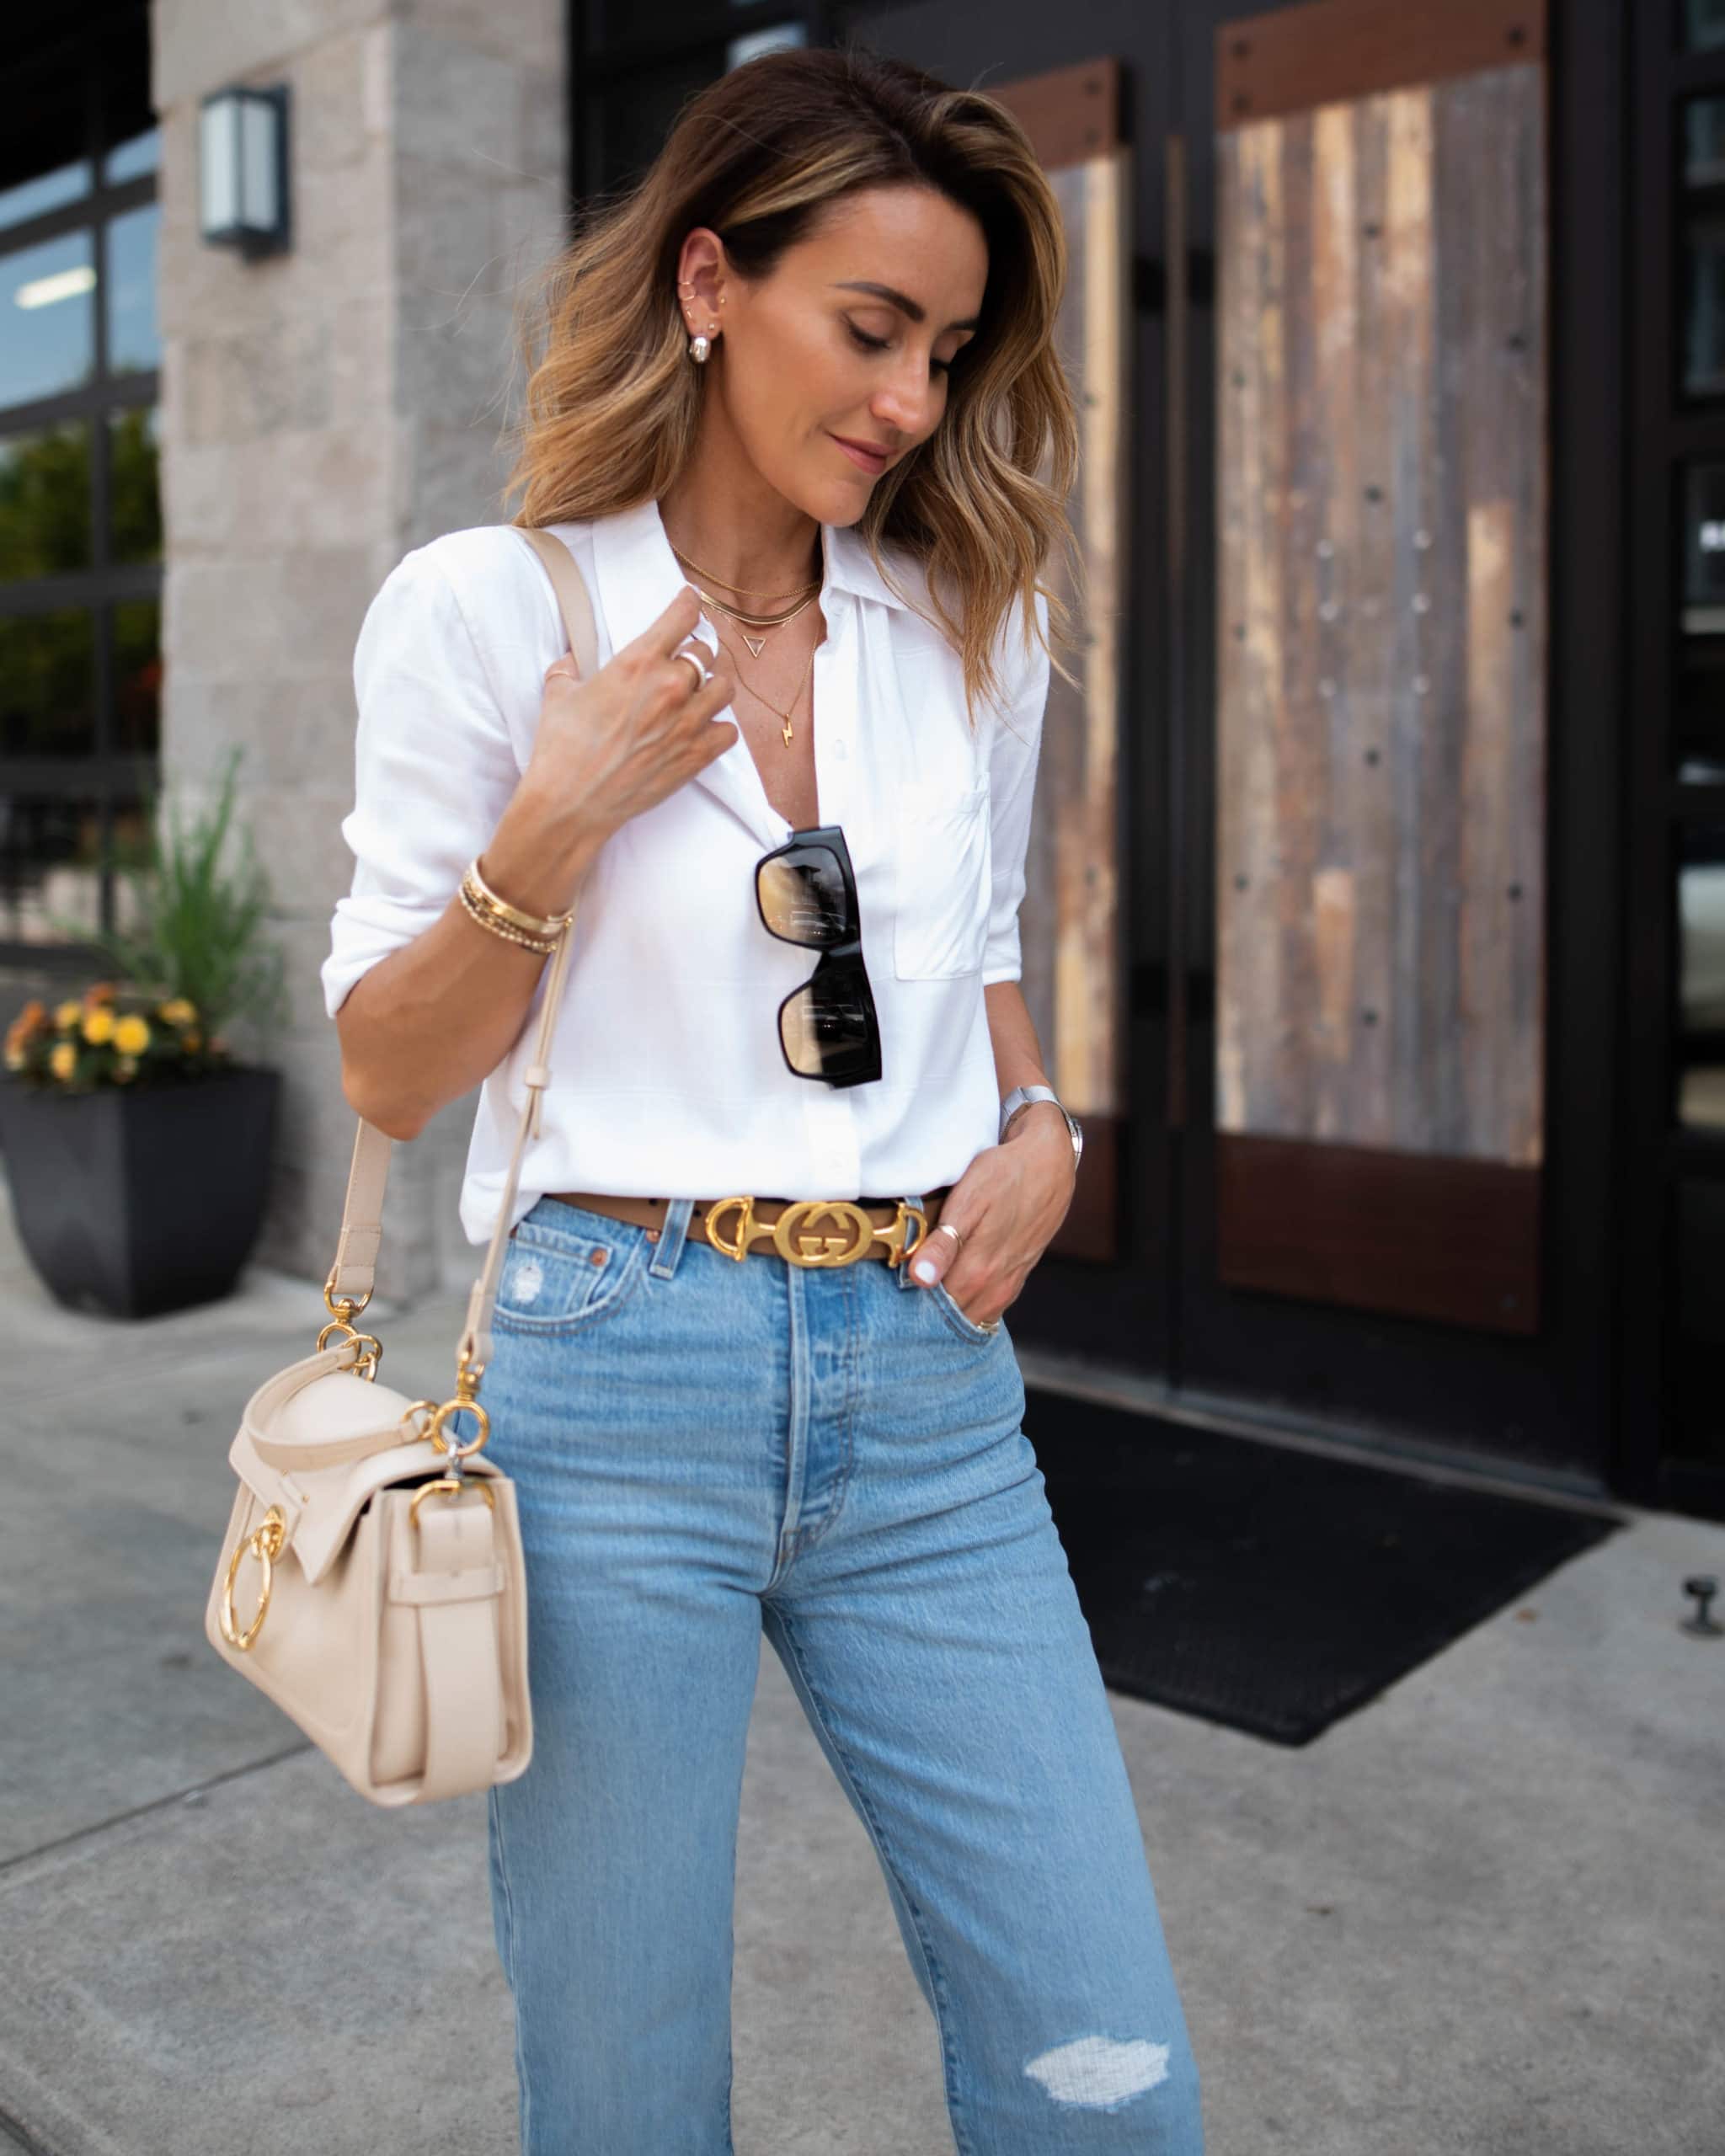 Weekly Outfit Round-Up Vol. 18 ft. Nordstrom Anniversary Sale Goodies ...